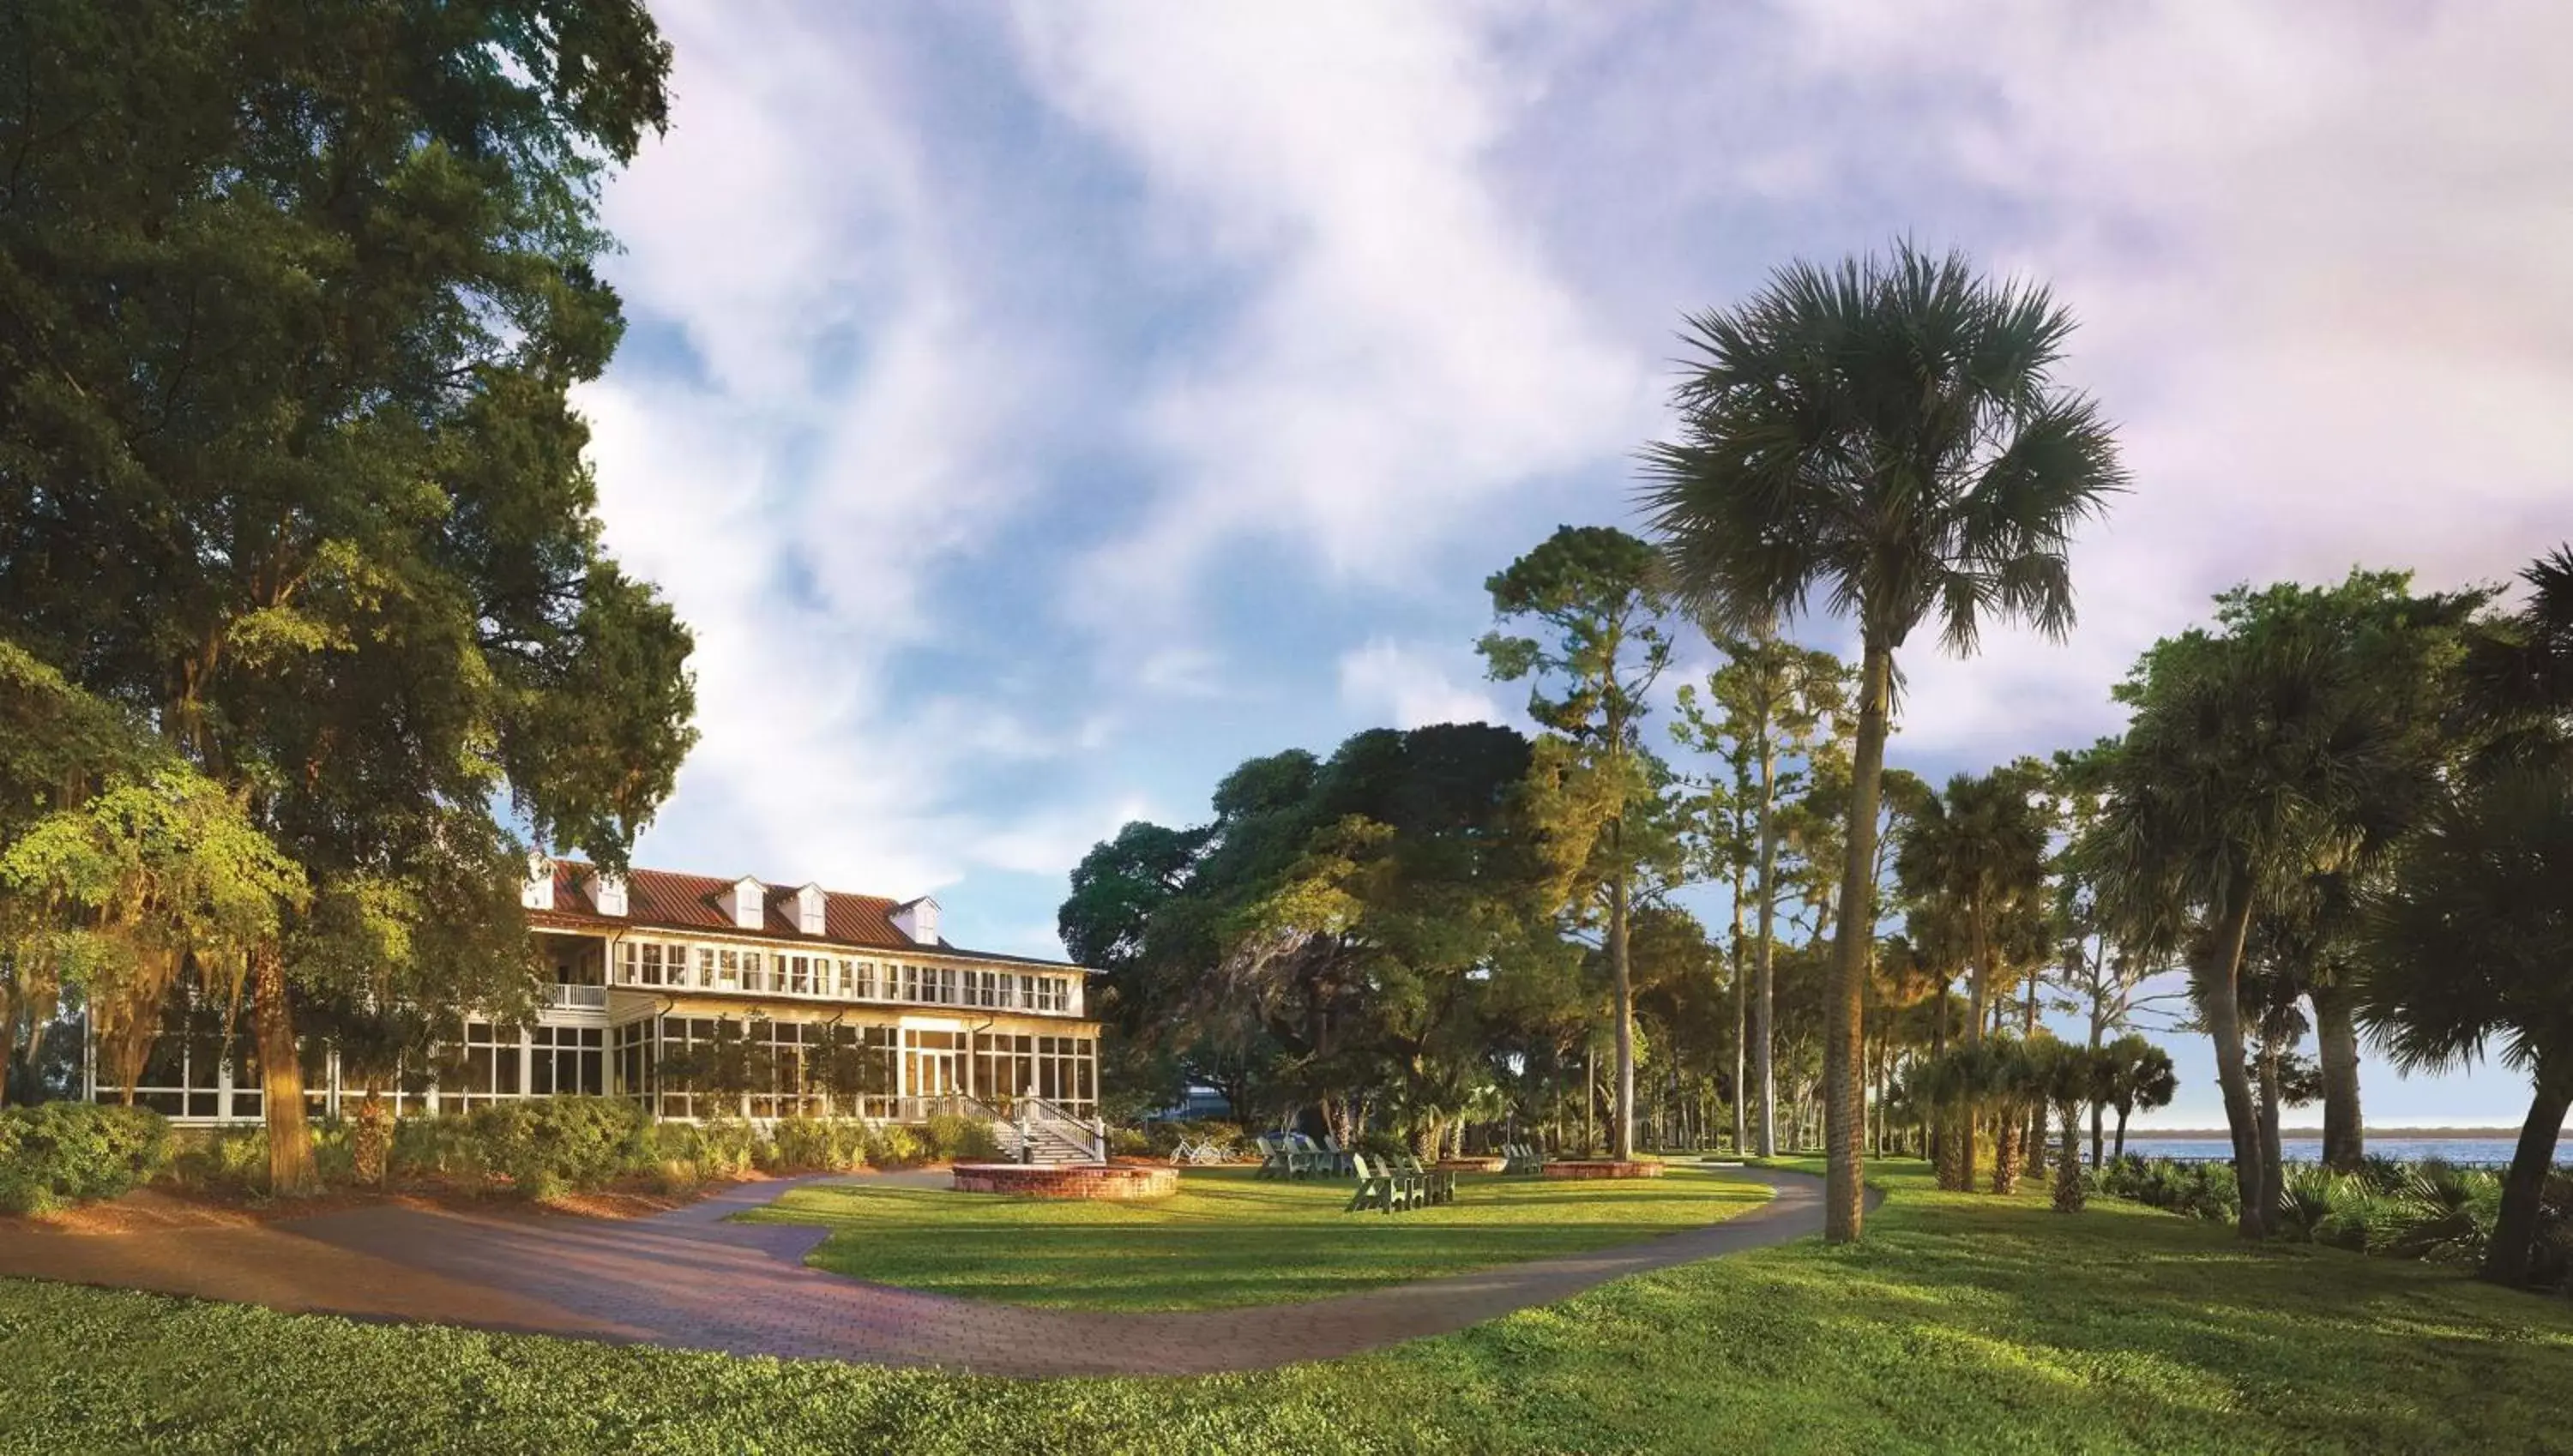 Golfcourse, Property Building in Montage Palmetto Bluff